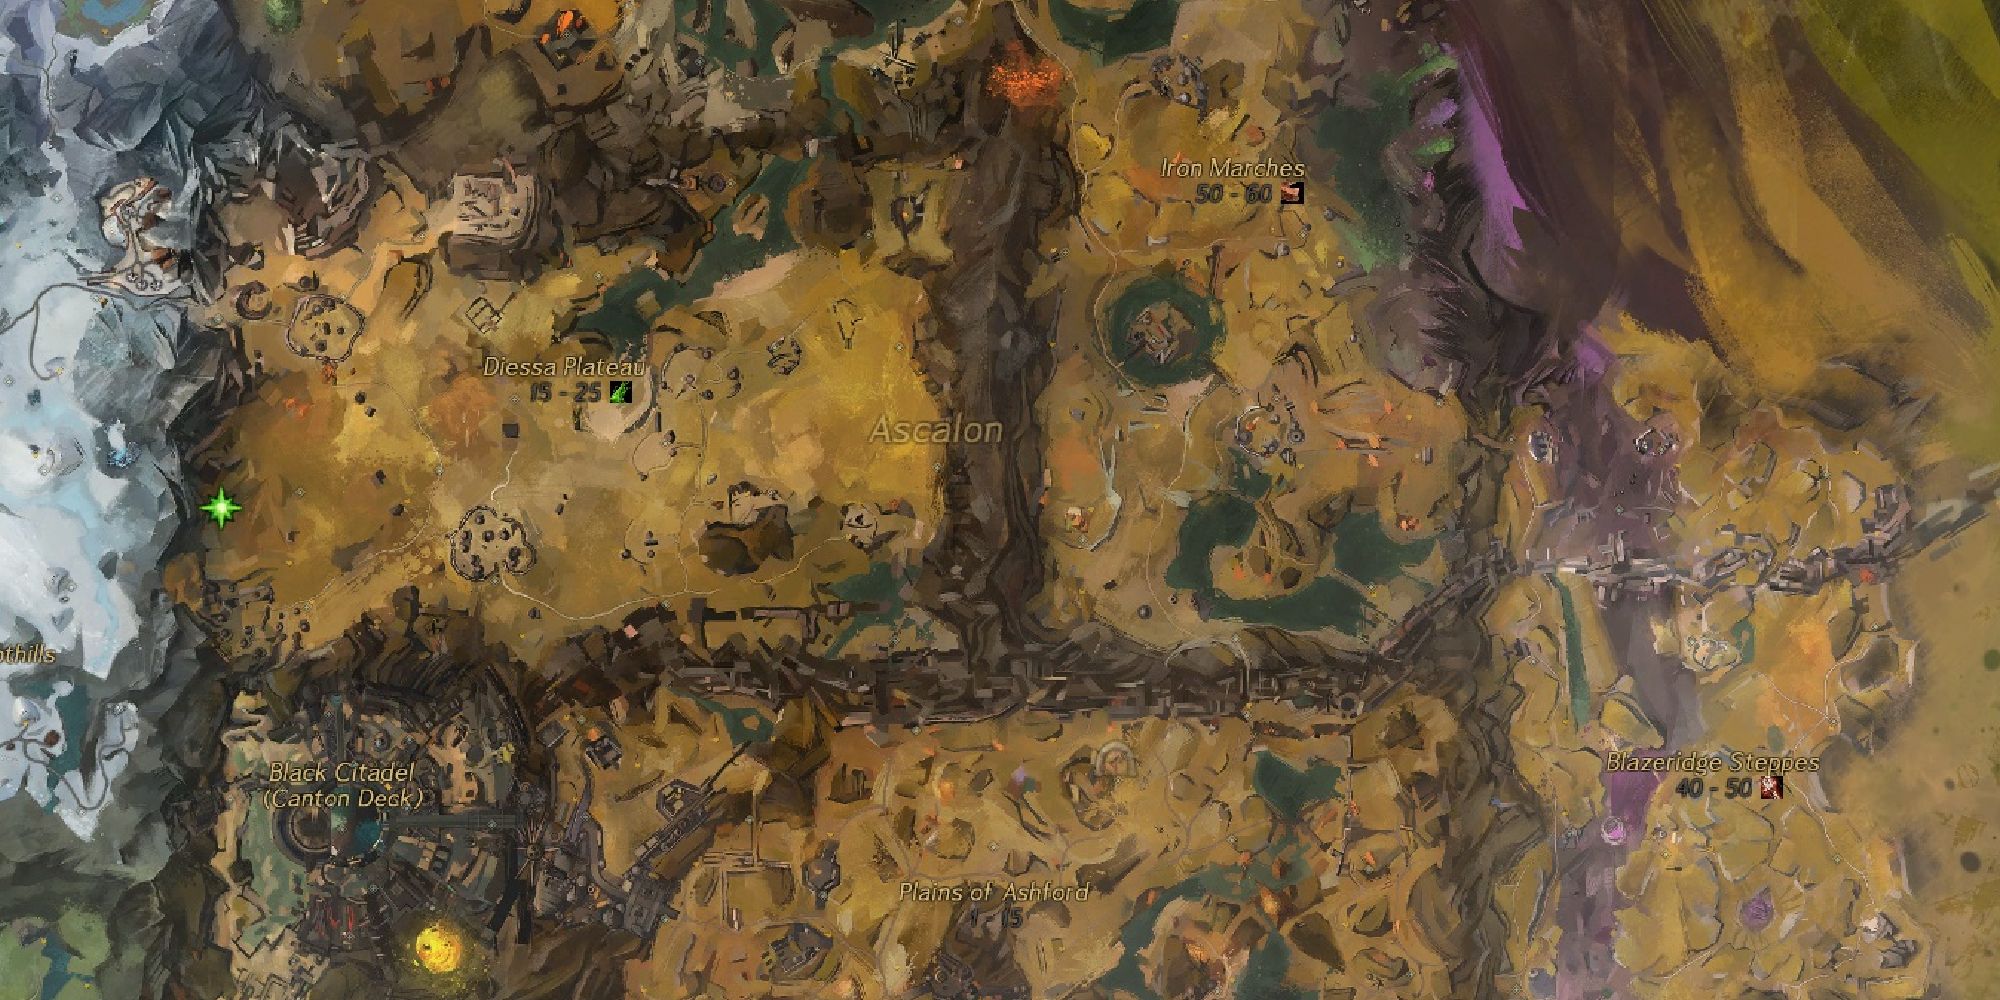 Ascalon locations shown on map of tyria